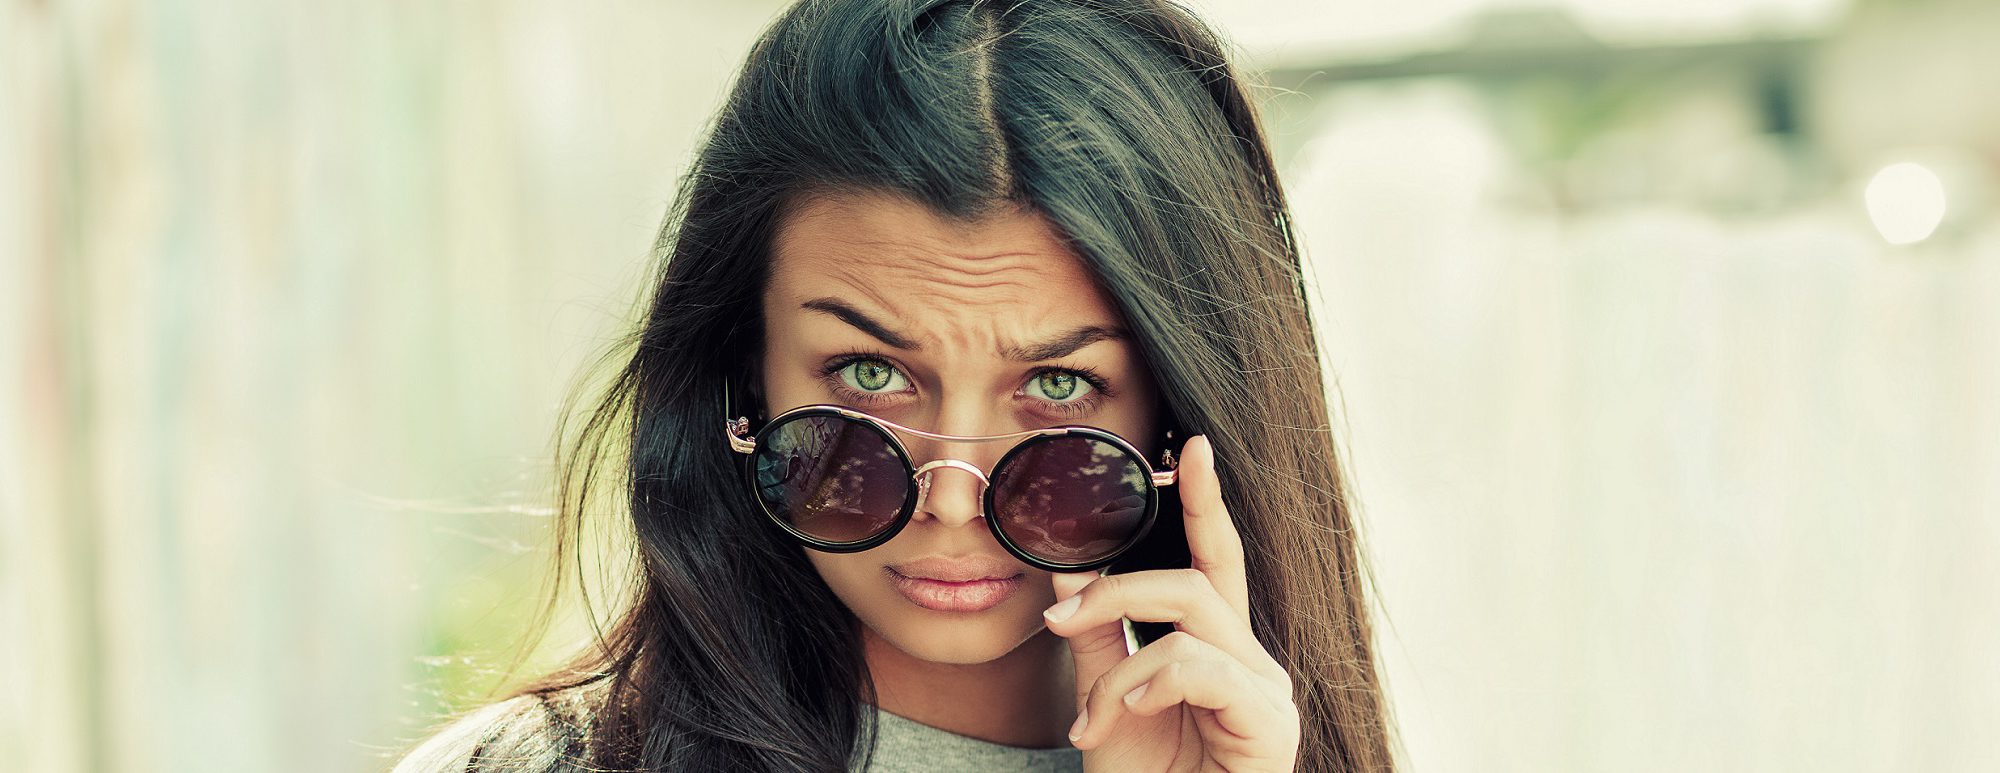 Closeup portrait beautiful young woman, lady looking at you camera over glasses gesture skeptically, isolated very green background. Negative human emotions, facial expression, feeling, body language